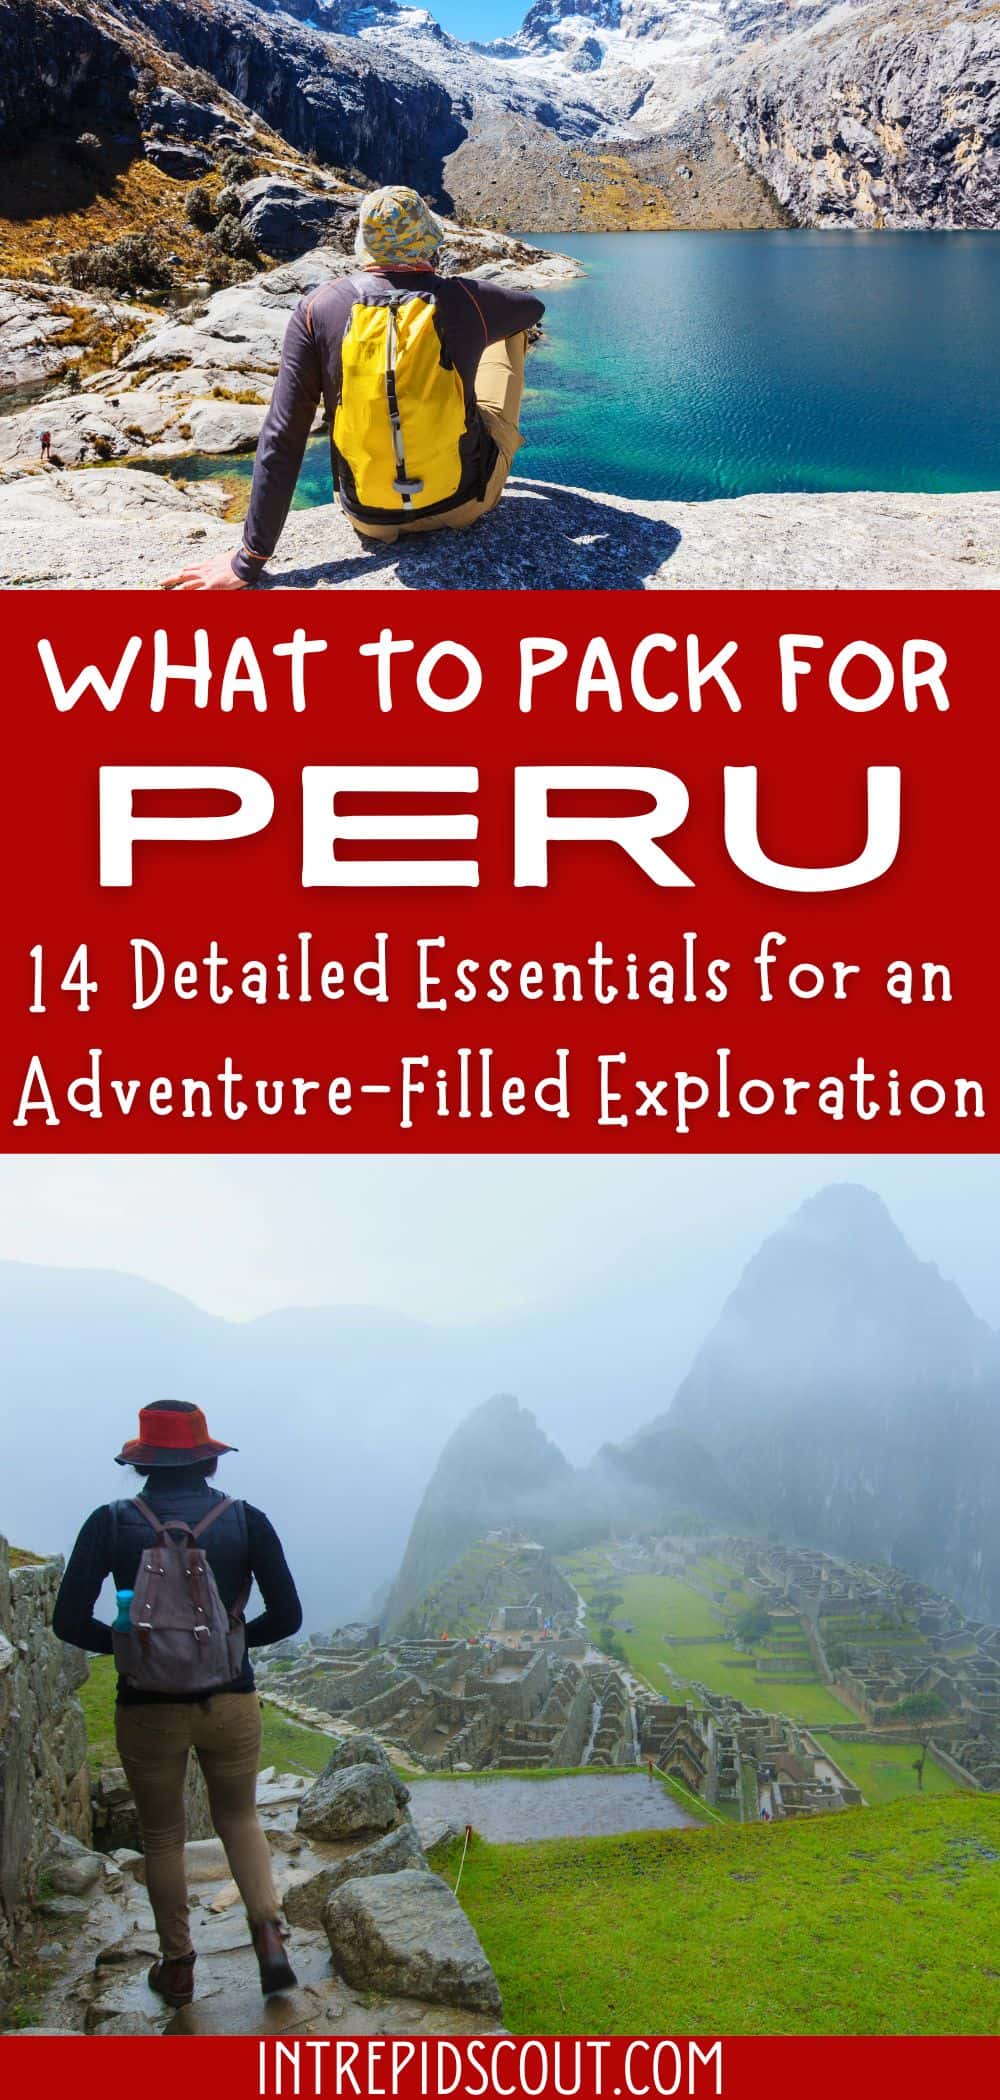 What to Pack for Peru